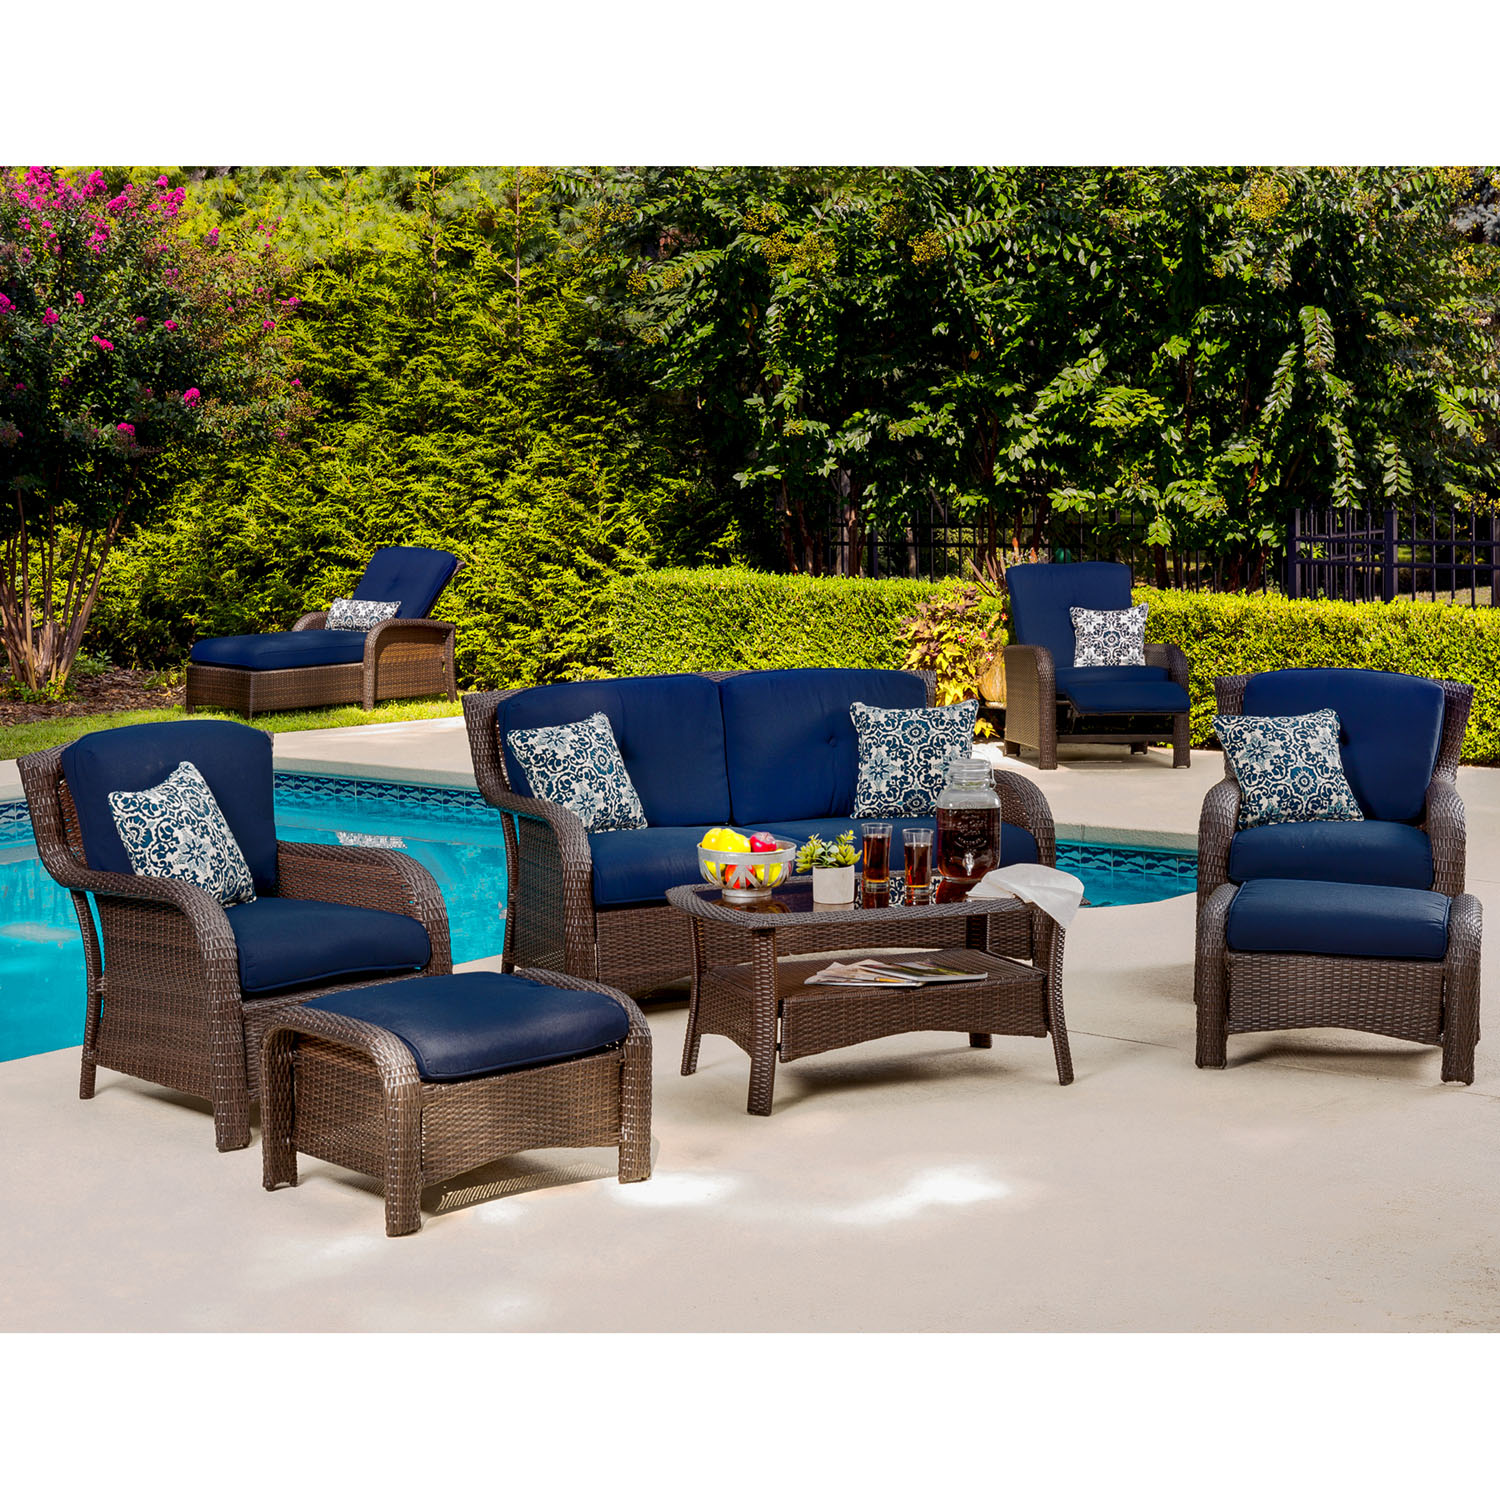 Hanover Strathmere 6-Piece Steel Outdoor Patio Deep Seating Set with Brown Wicker, Navy Blue Cushions, 4 Pillows and Glass Top Rectangular Coffee Table, STRATHMERE6PCNVY - image 3 of 18